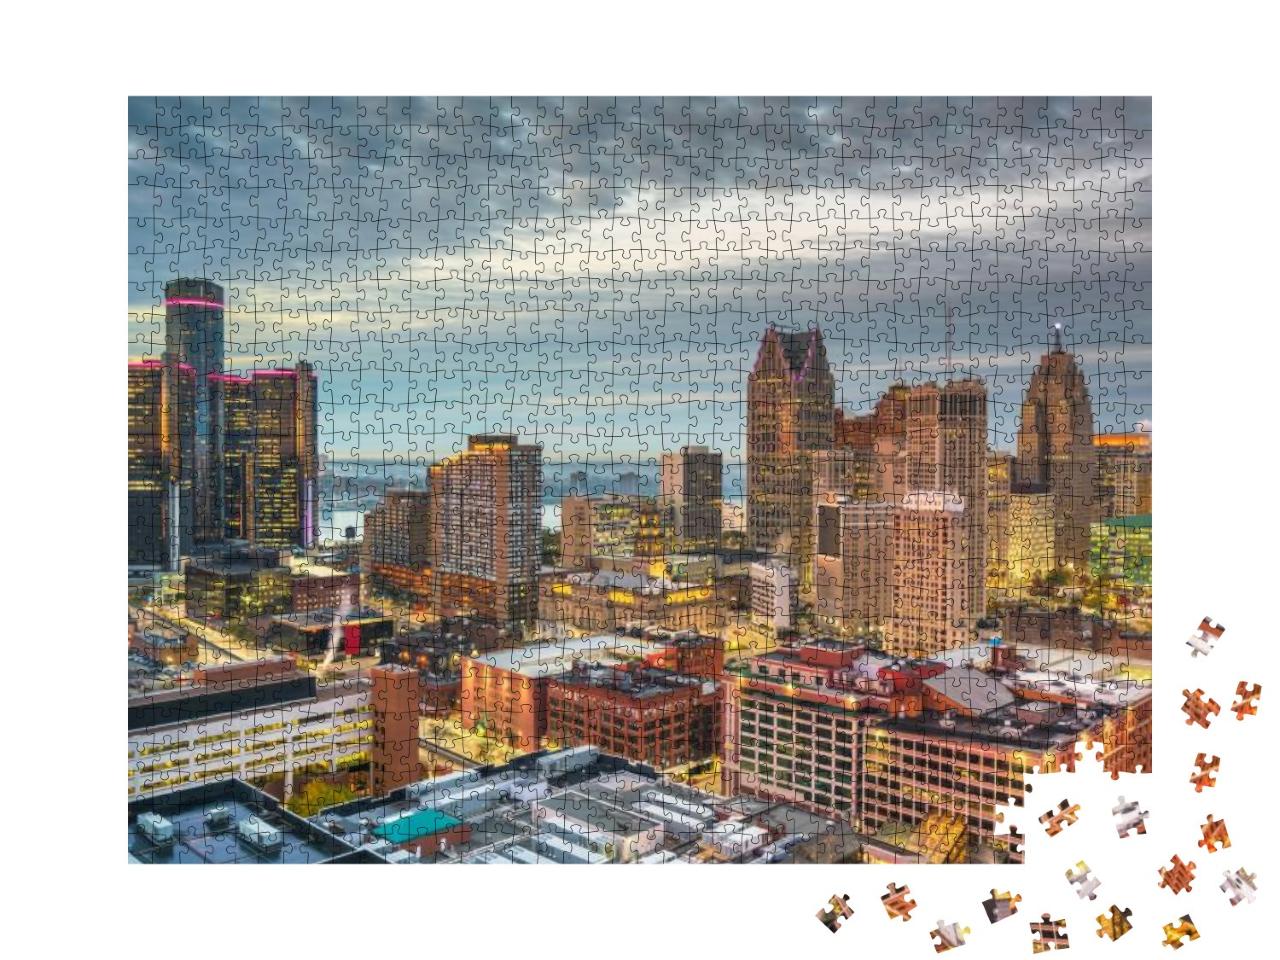 Detroit, Michigan, USA Downtown Skyline from Above At Dusk... Jigsaw Puzzle with 1000 pieces